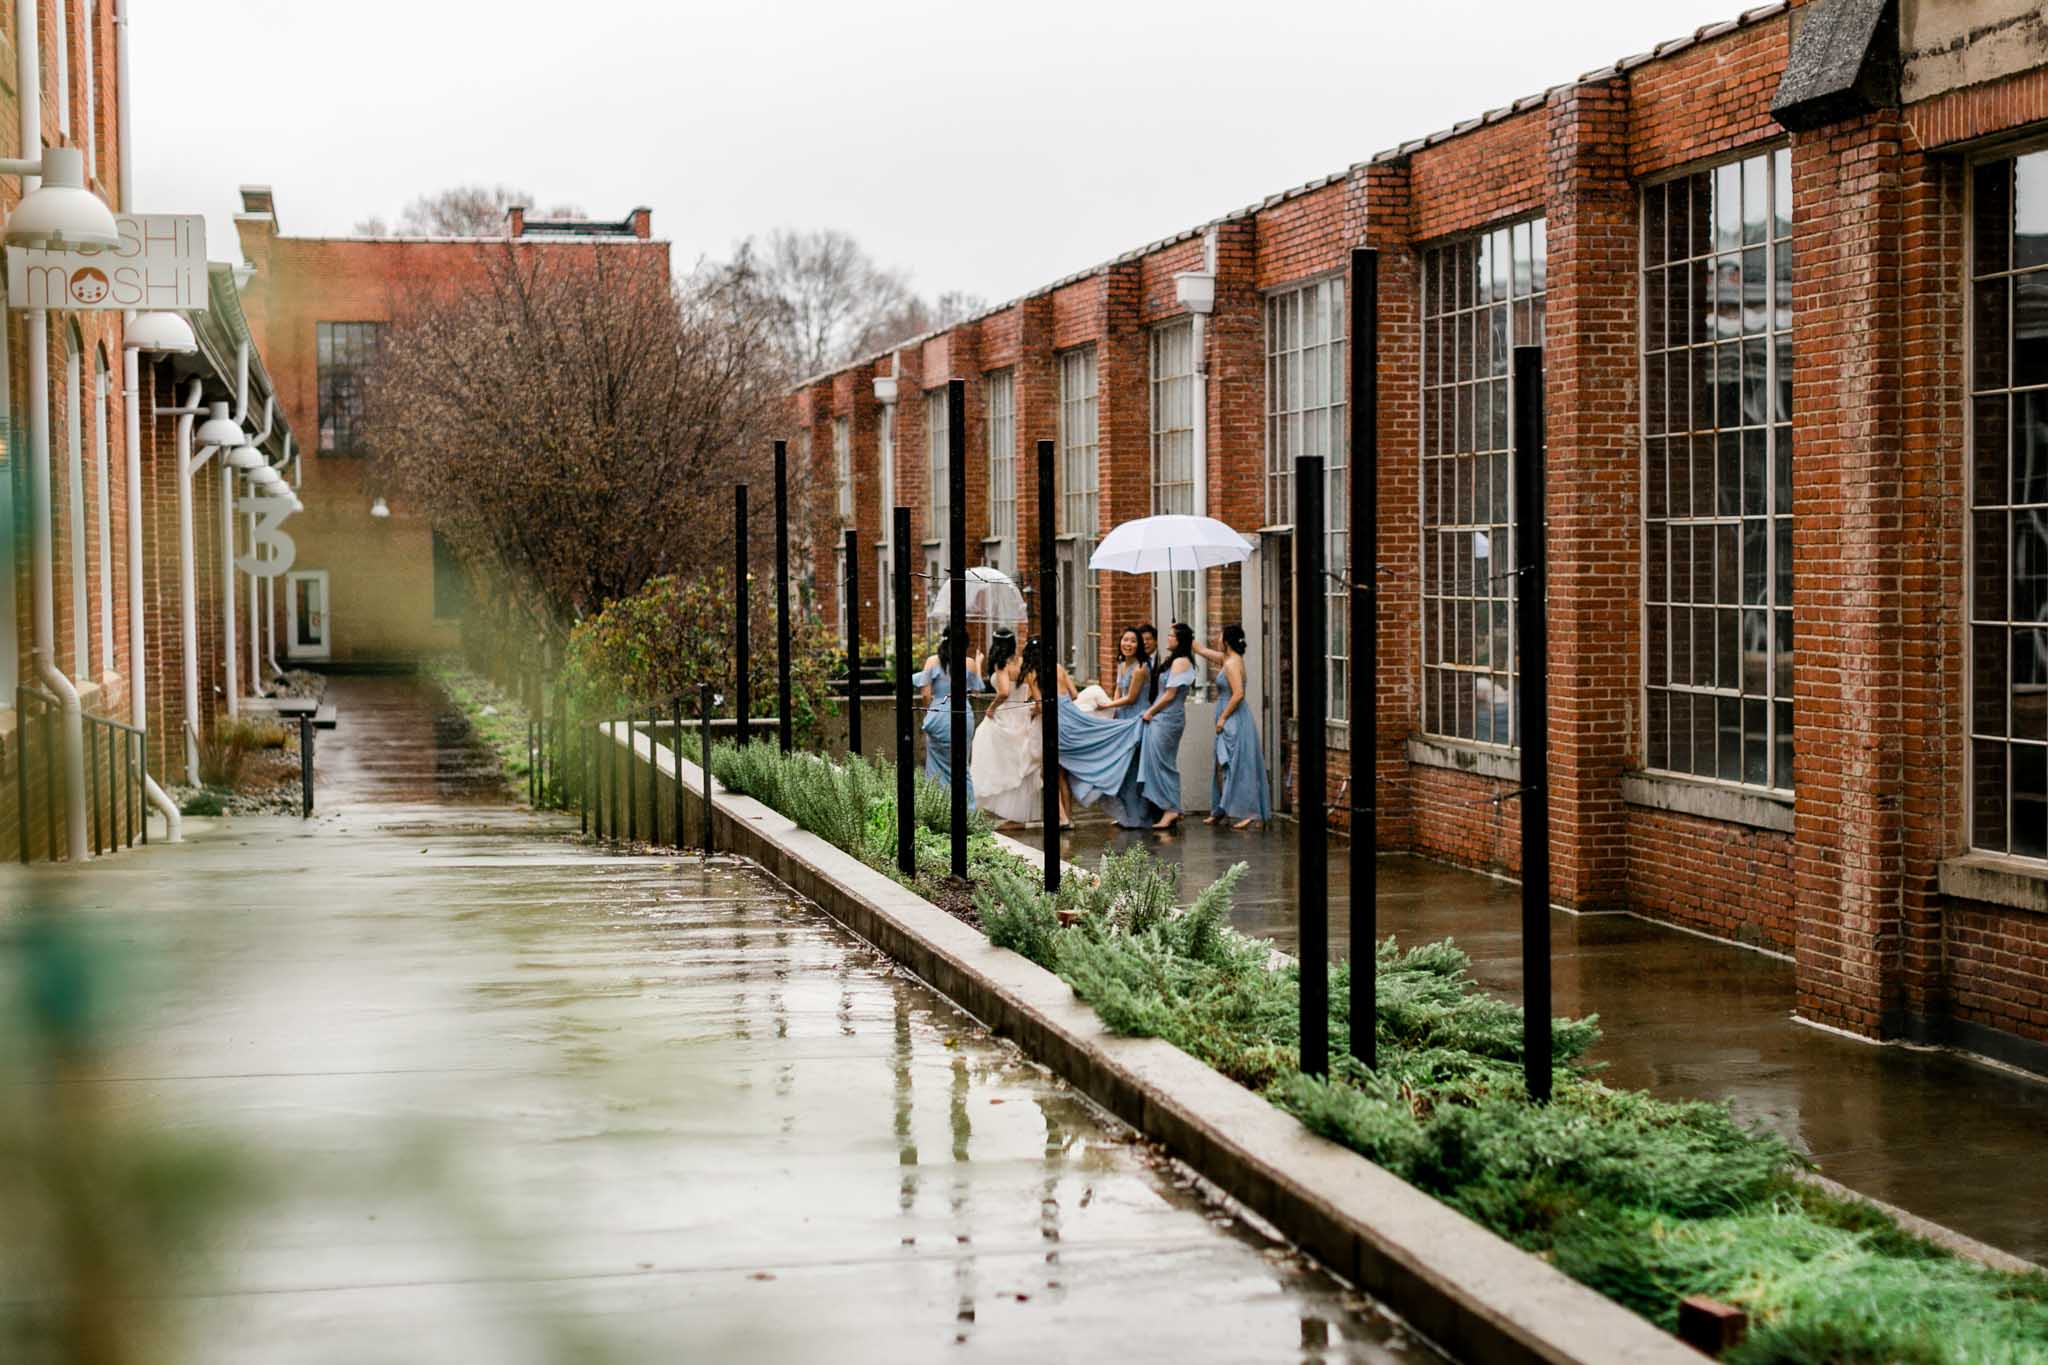 Bridesmaids and bride walking in rain | The Cotton Room Wedding | Durham Photographer | By G. Lin Photography